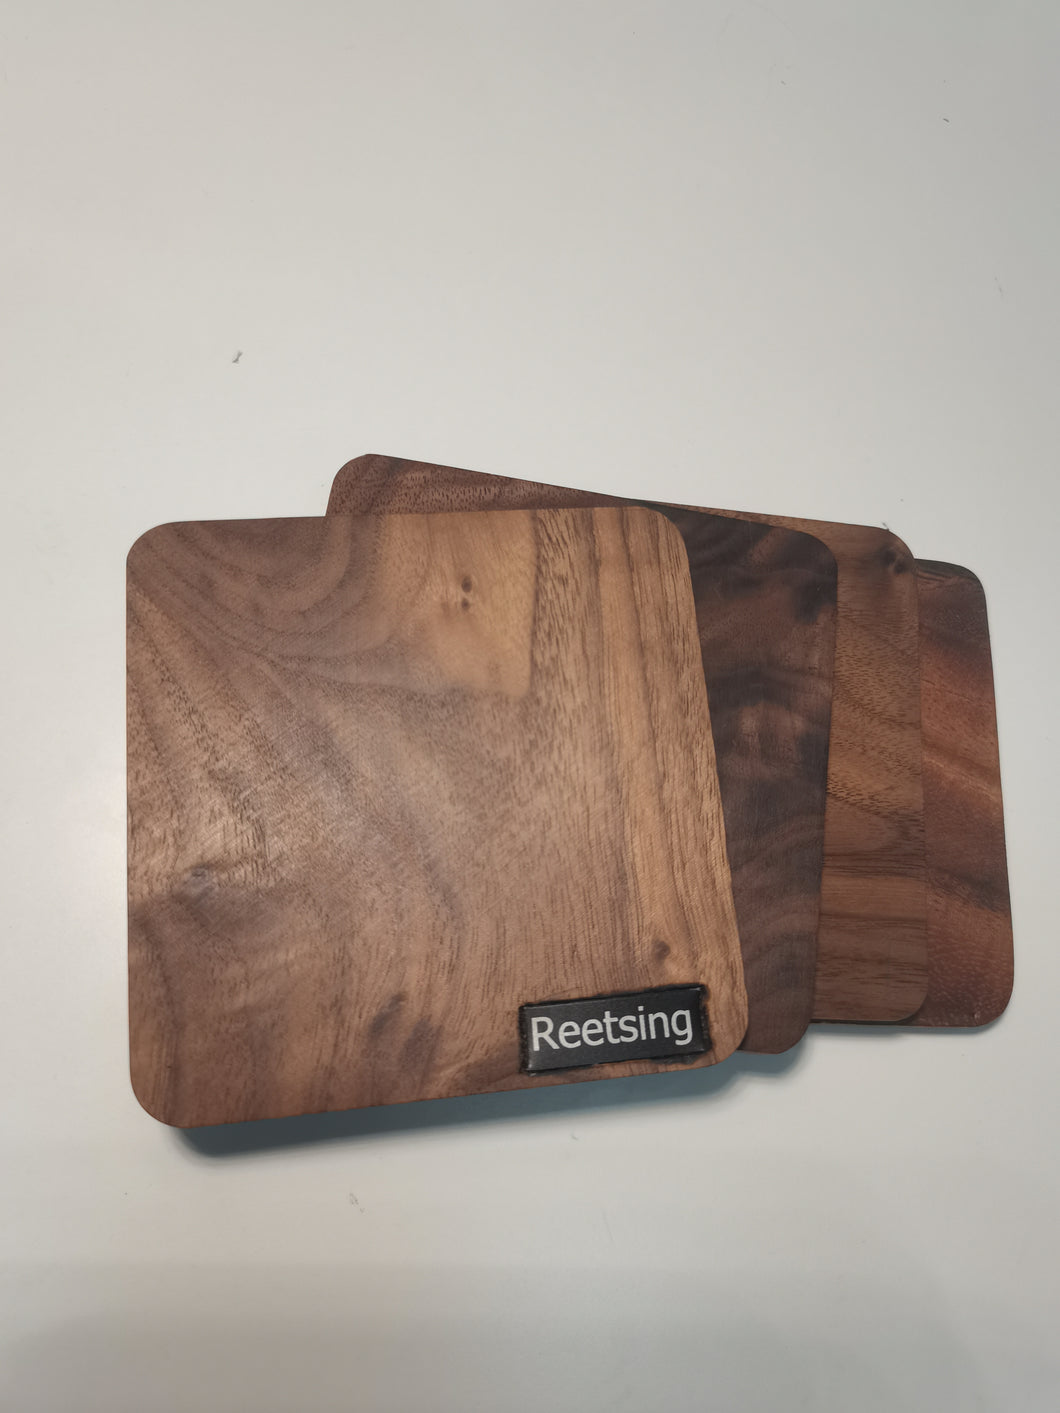 Reetsing coaster,Coasters for Wooden Table, Farmhouse Coaster,  Square Walnut Wood Coaster(4 Inch), Fit Ceramic Cup and Glass Cup or Any Size of Drink Glasses, Housewarming Gifts